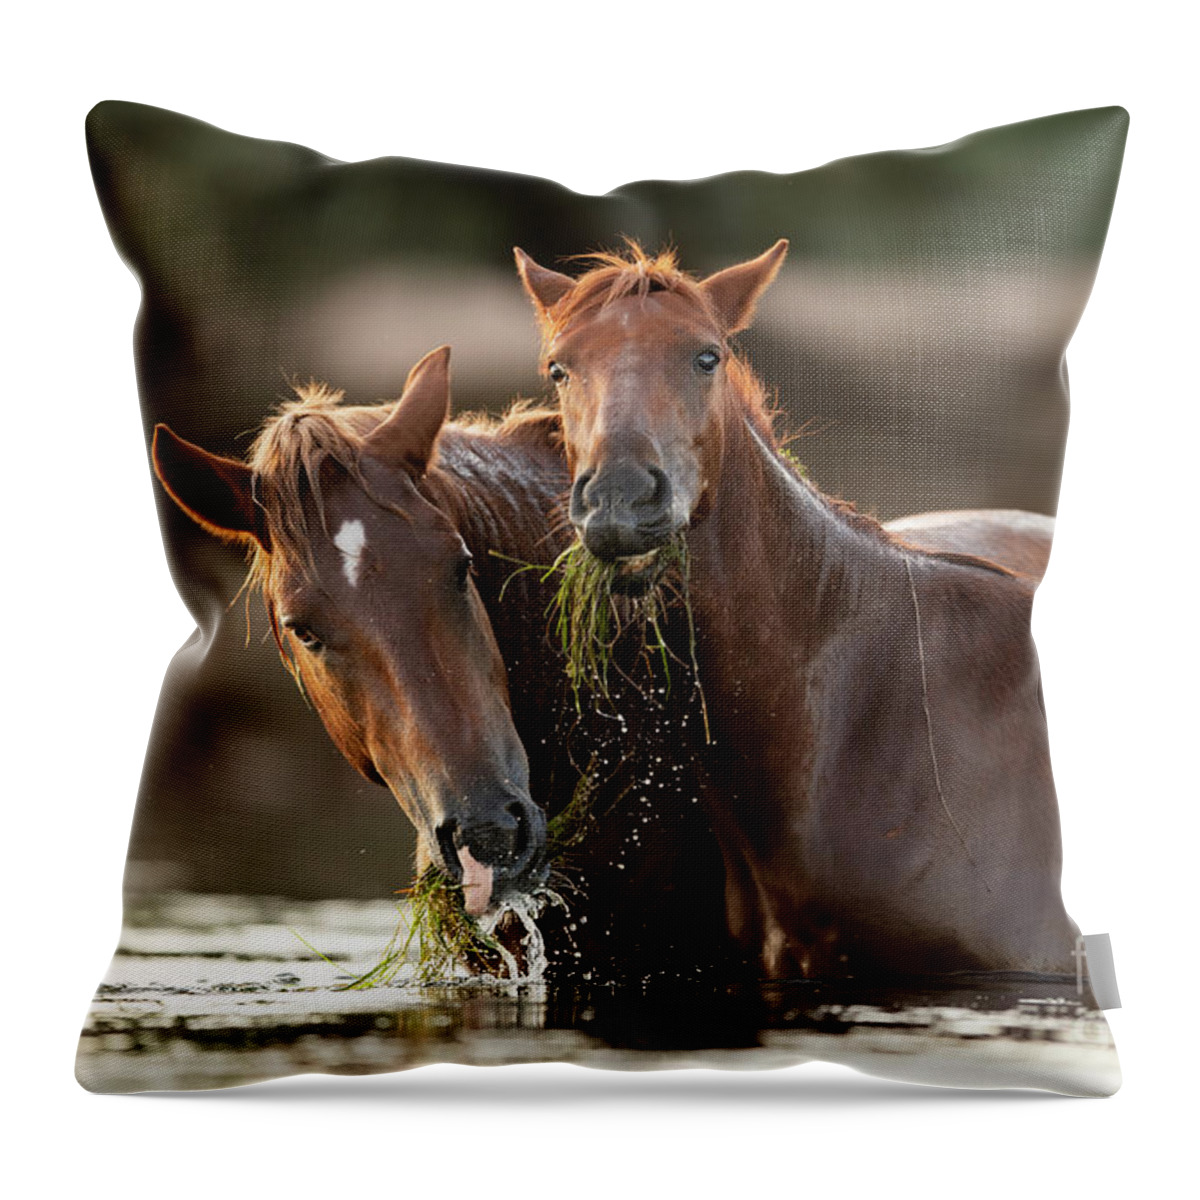 Salt River Wild Horses Throw Pillow featuring the photograph Happy Meal by Shannon Hastings